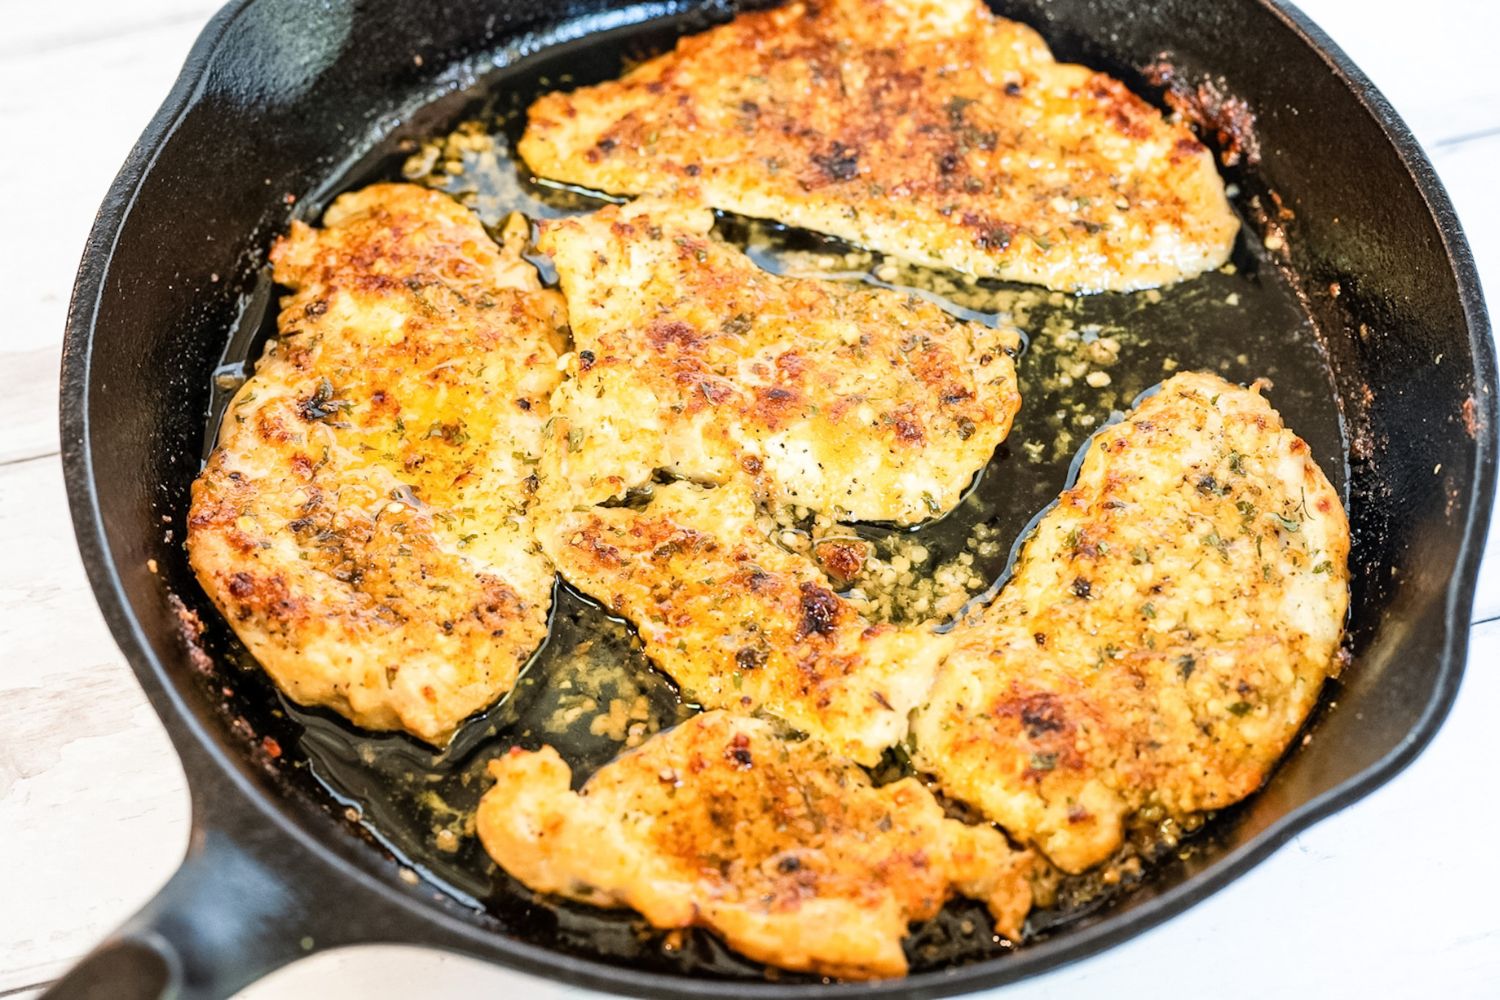 Garlic Parmesan Chicken Cutlets cooked to perfection in a cast iron skillet, seasoned and ready to serve, set against a clean white background.